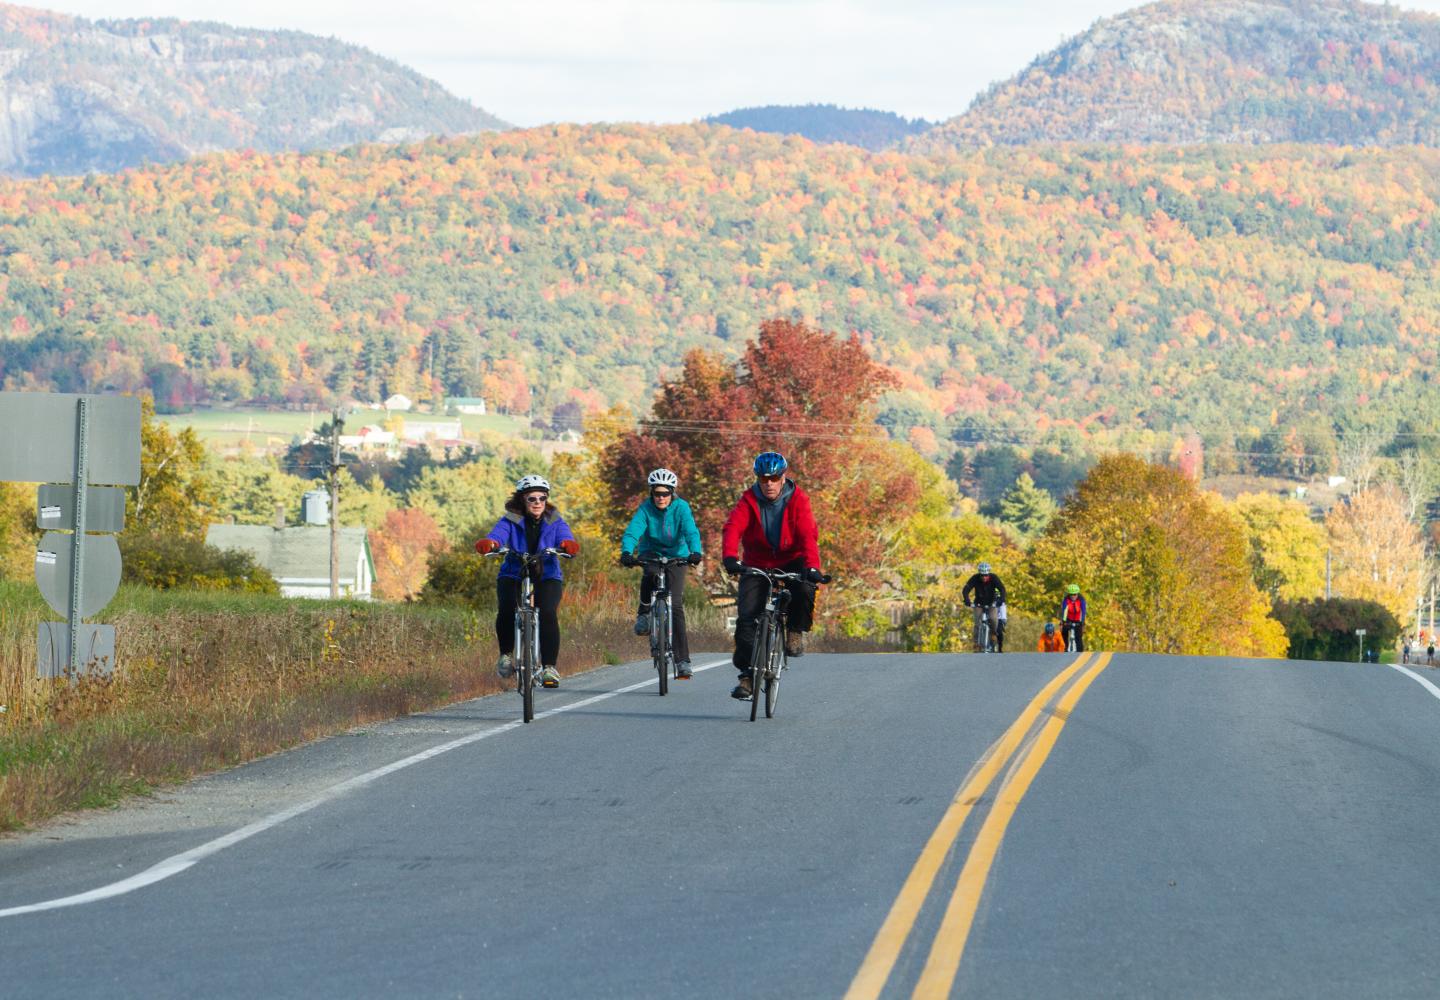 Spring, summer or fall riding is an absolute treat in the Champlain Valley.